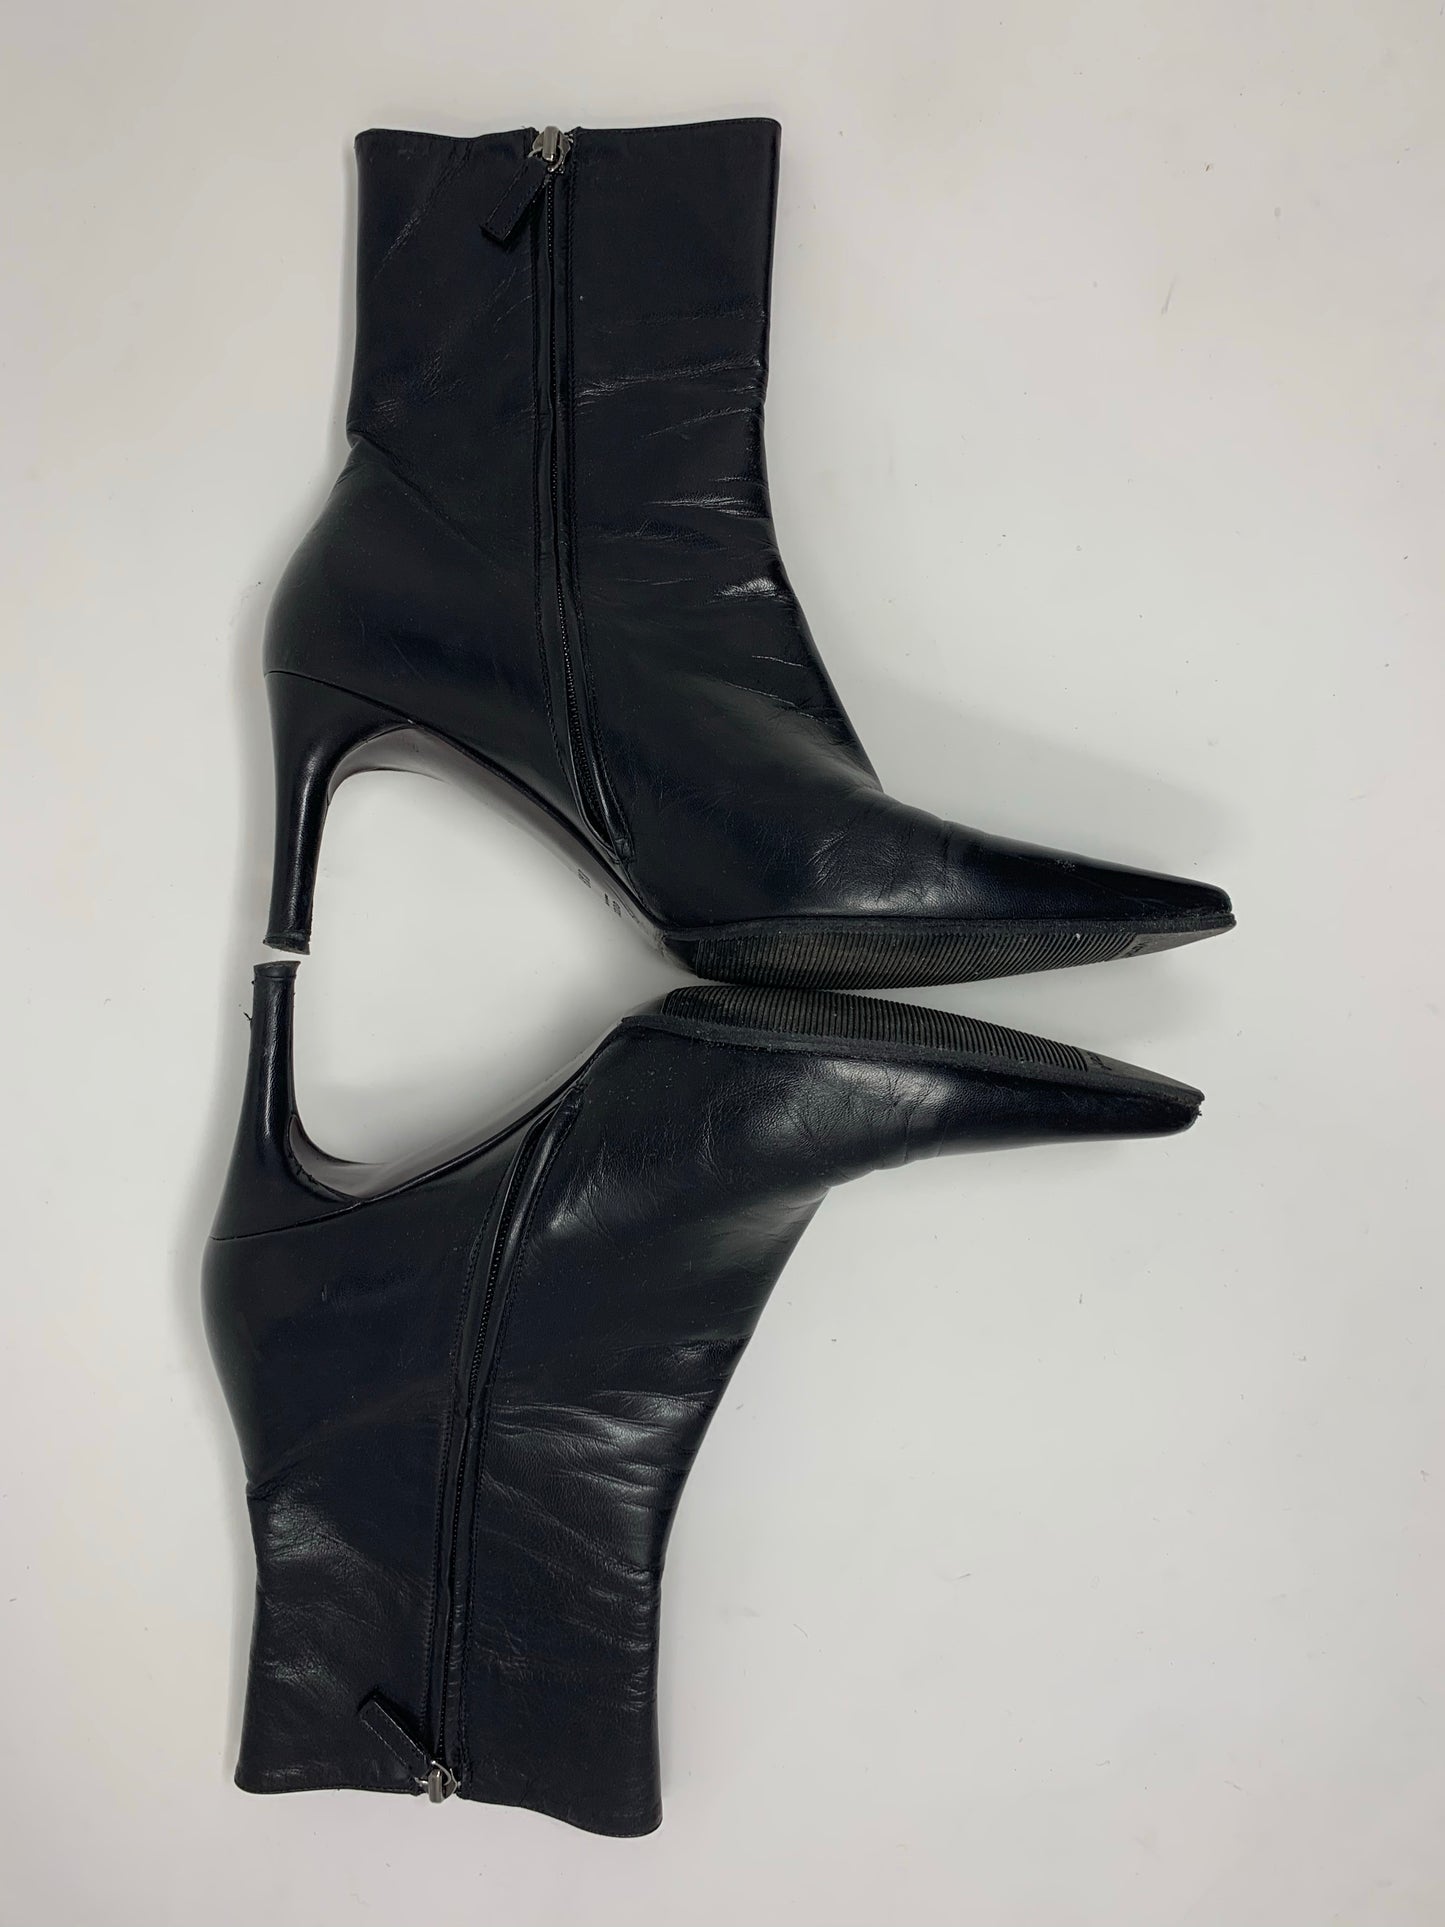 Gucci by Tom Ford SS 1997 Heeled Boots